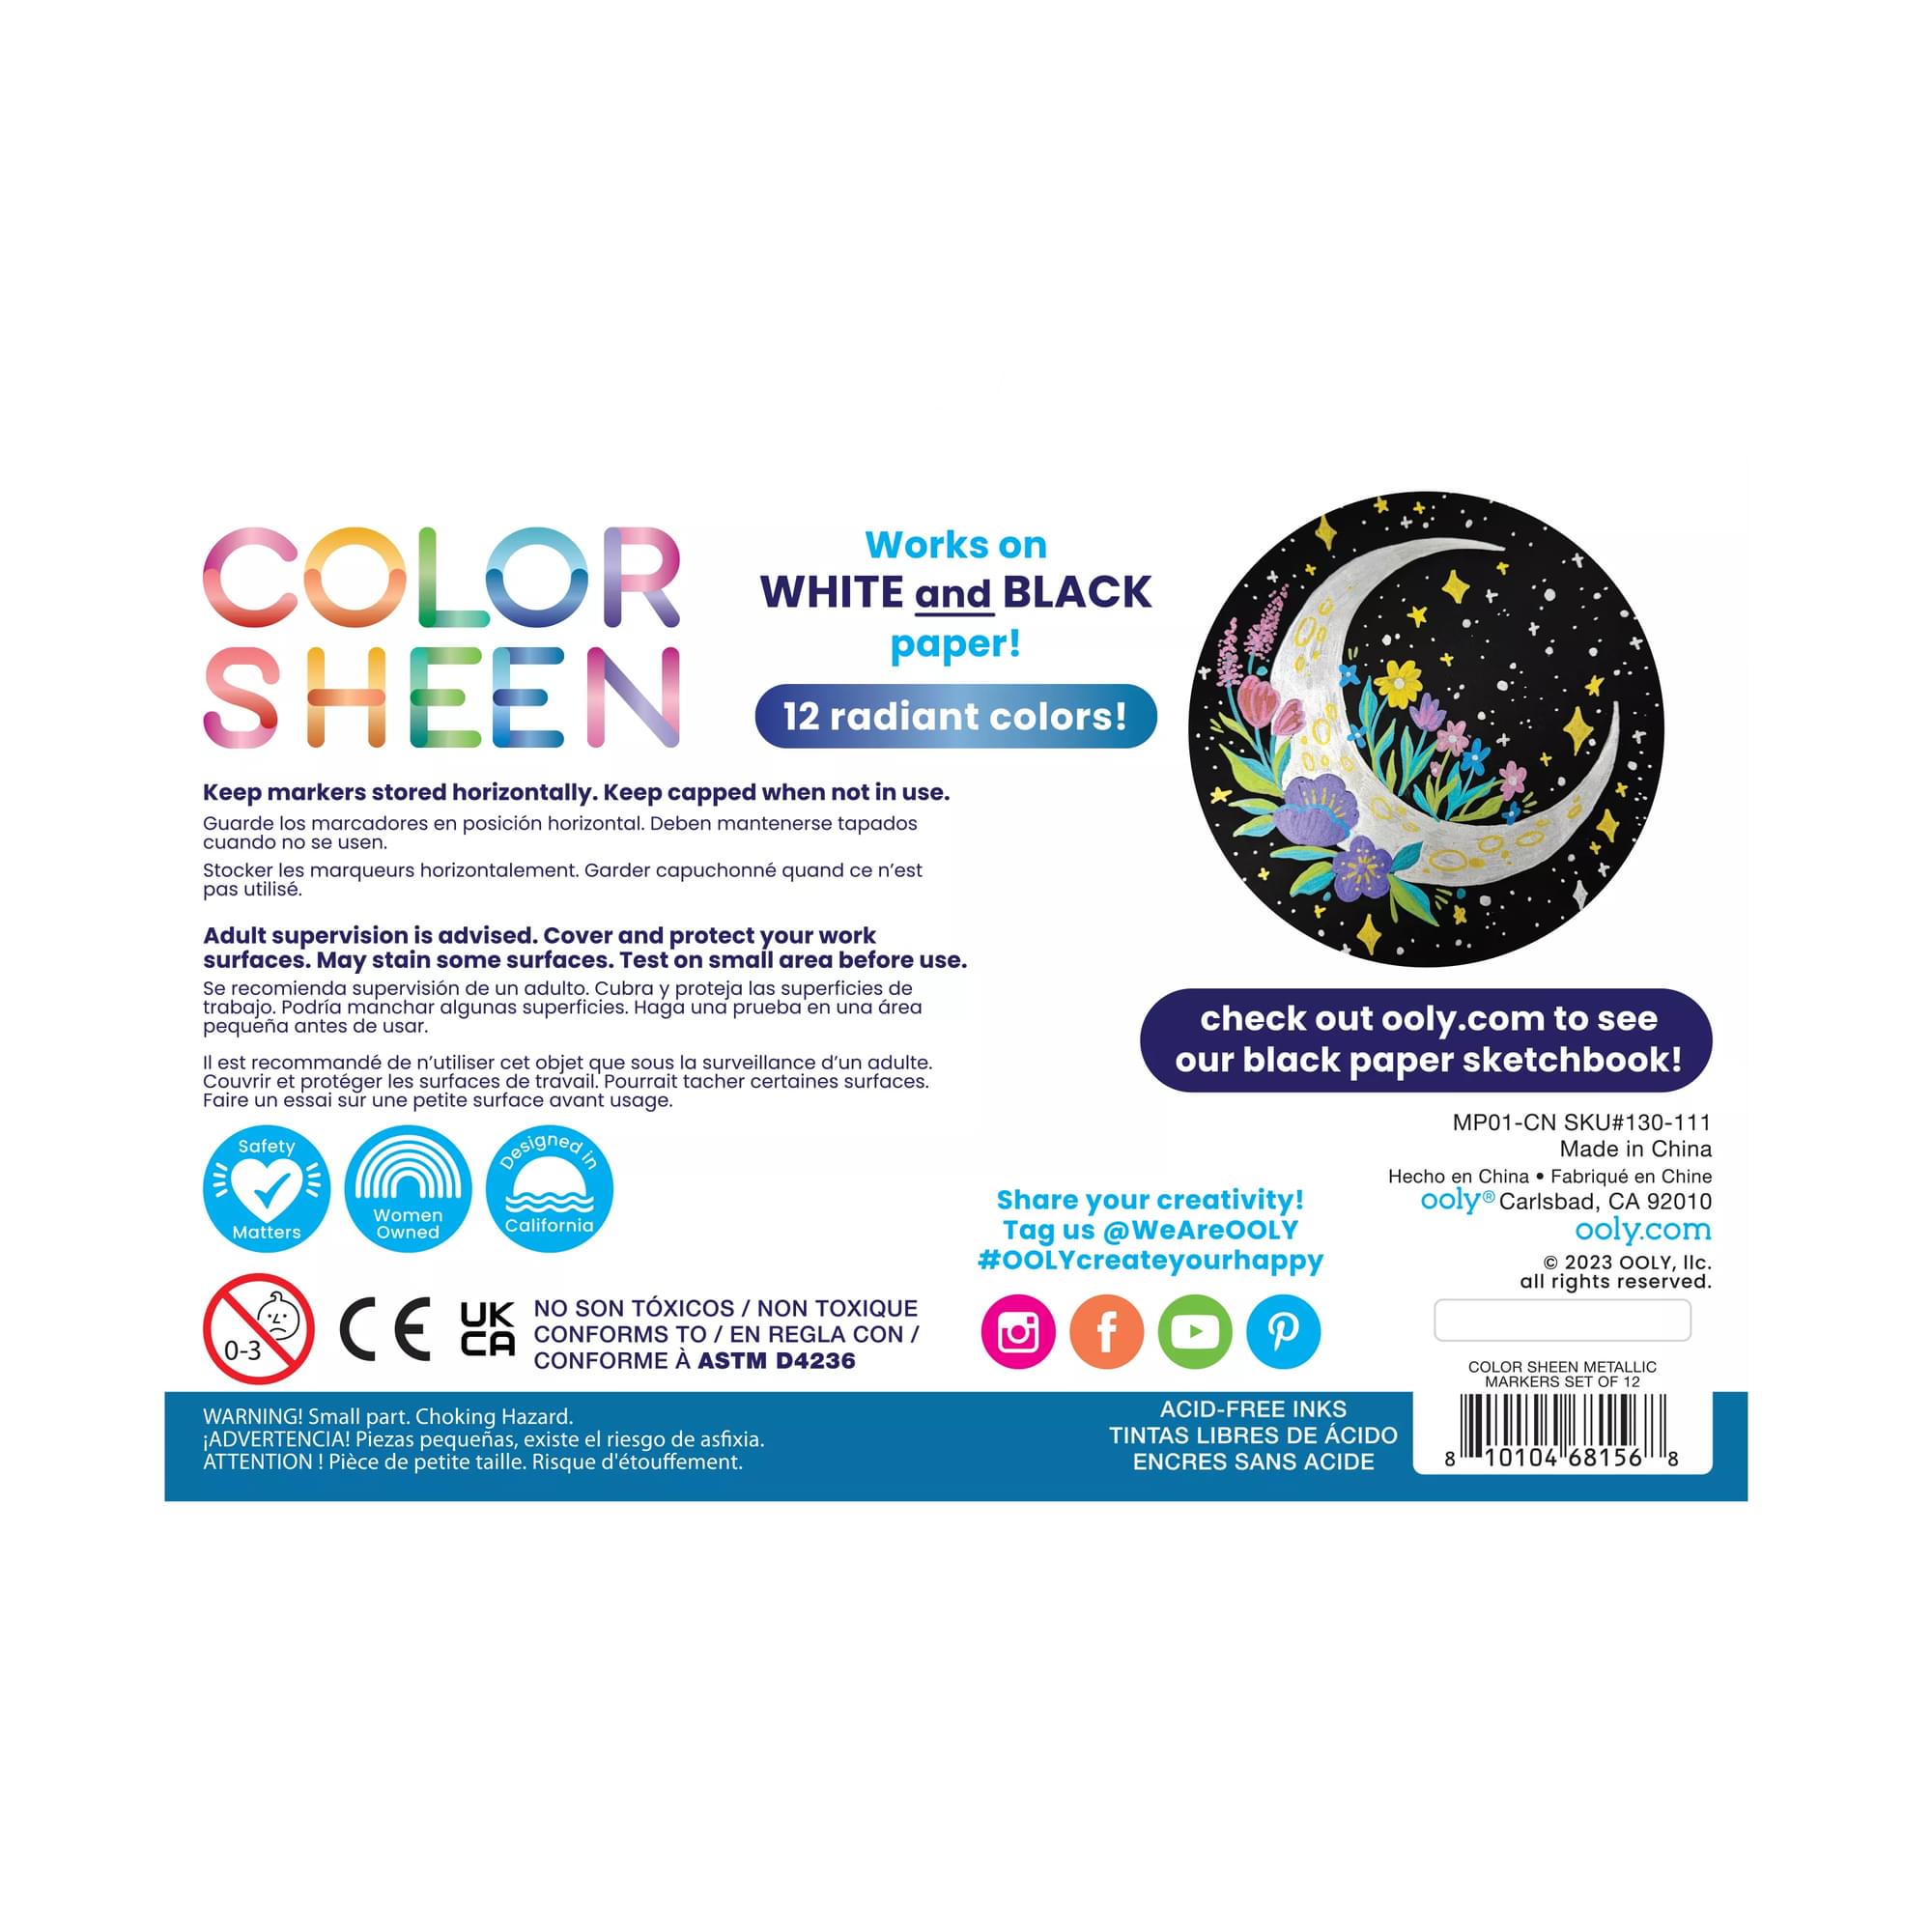 Color Sheen Metallic Colored Felt Tip Markers back of packaging